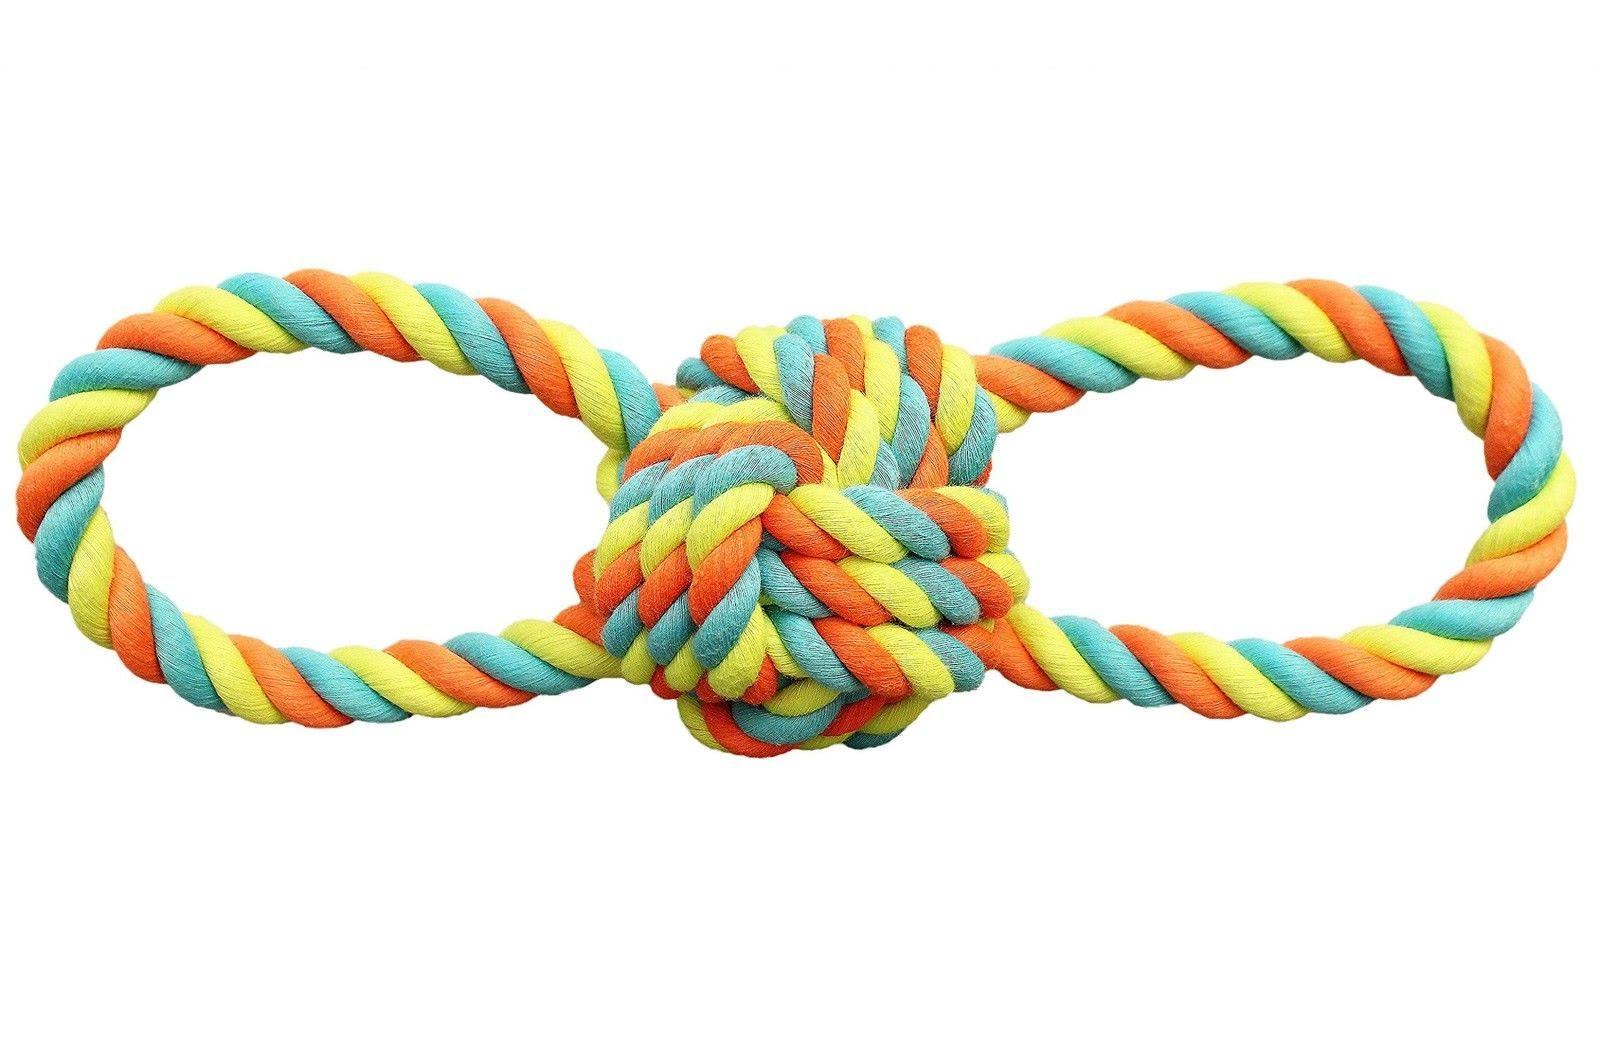 Boss Pet Products 1868058 Pet Toy Rope Ball, 11 in.